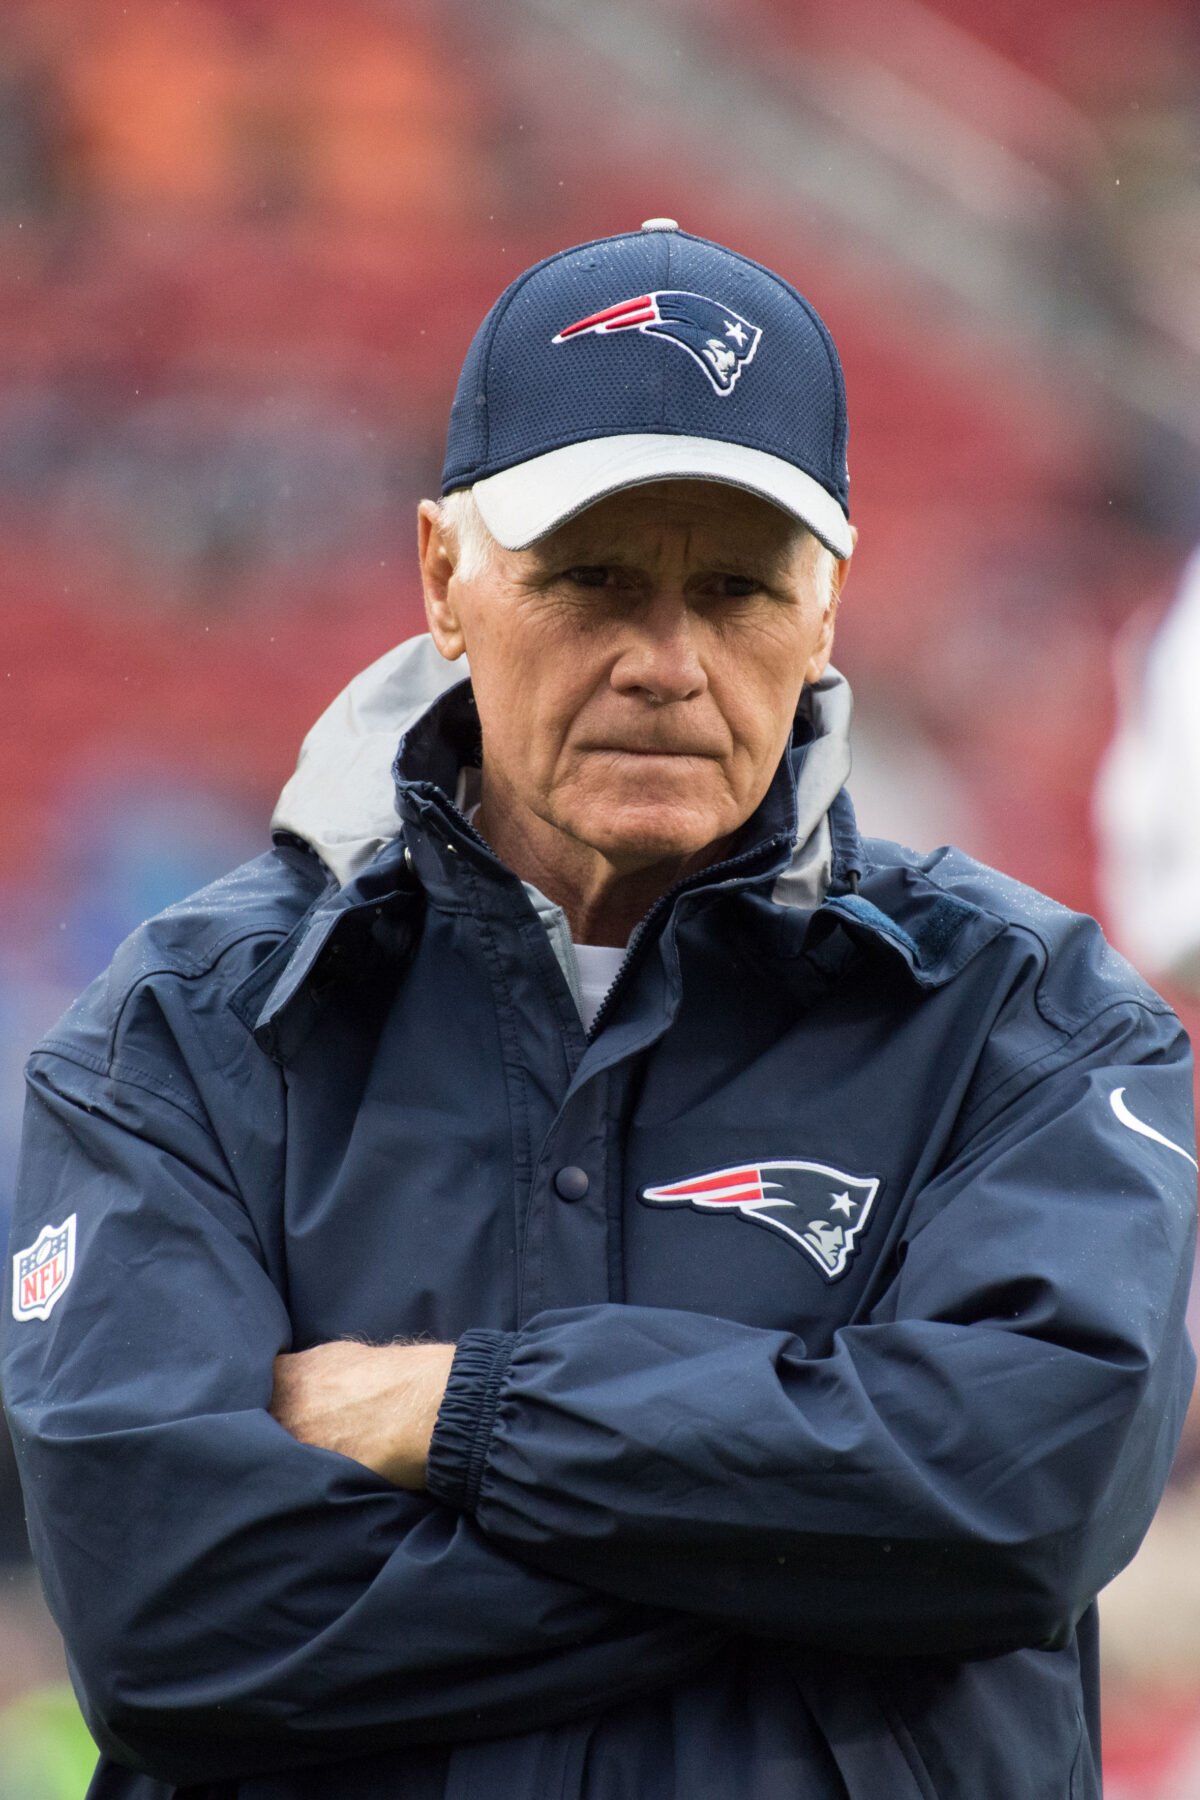 Dante Scarnecchia to get high honor from Pro Football Hall of Fame